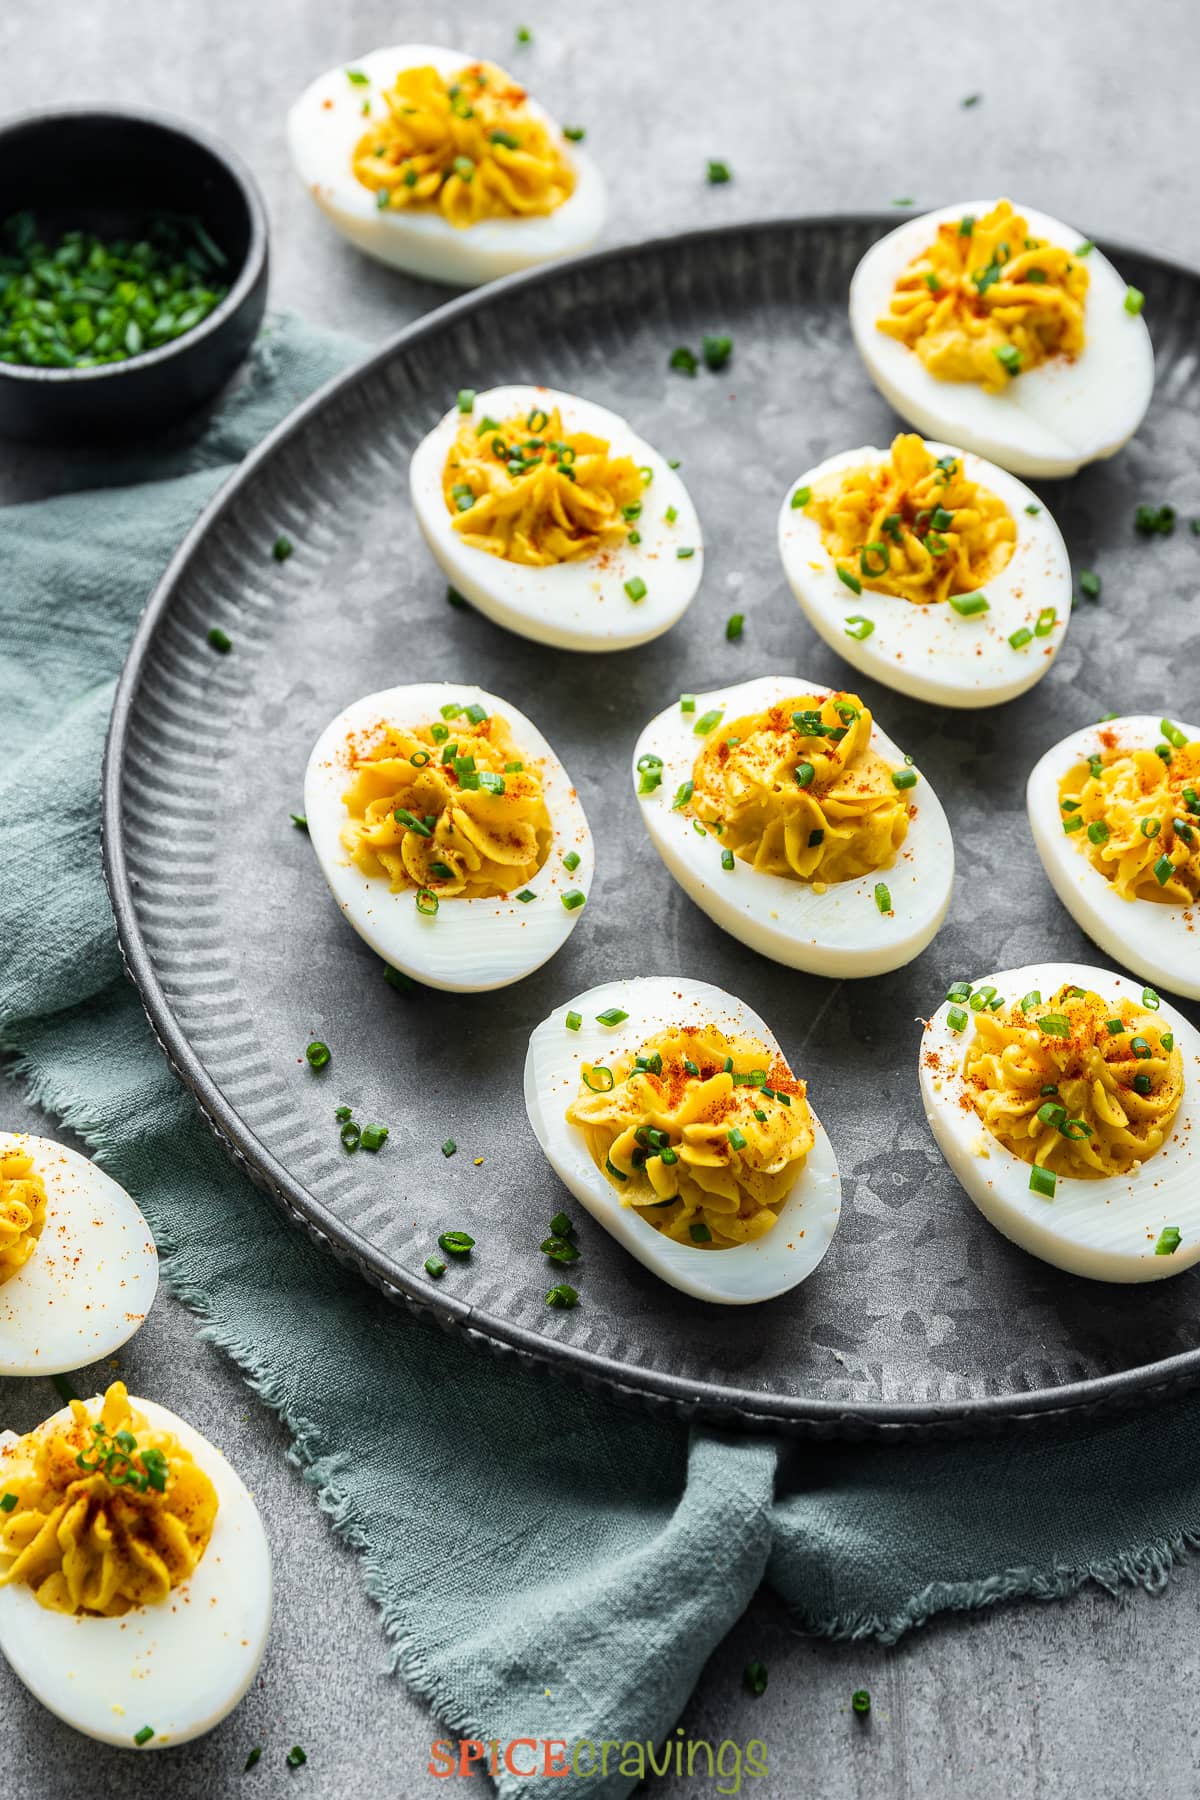 spiced deviled eggs garnished with chives on gray plate